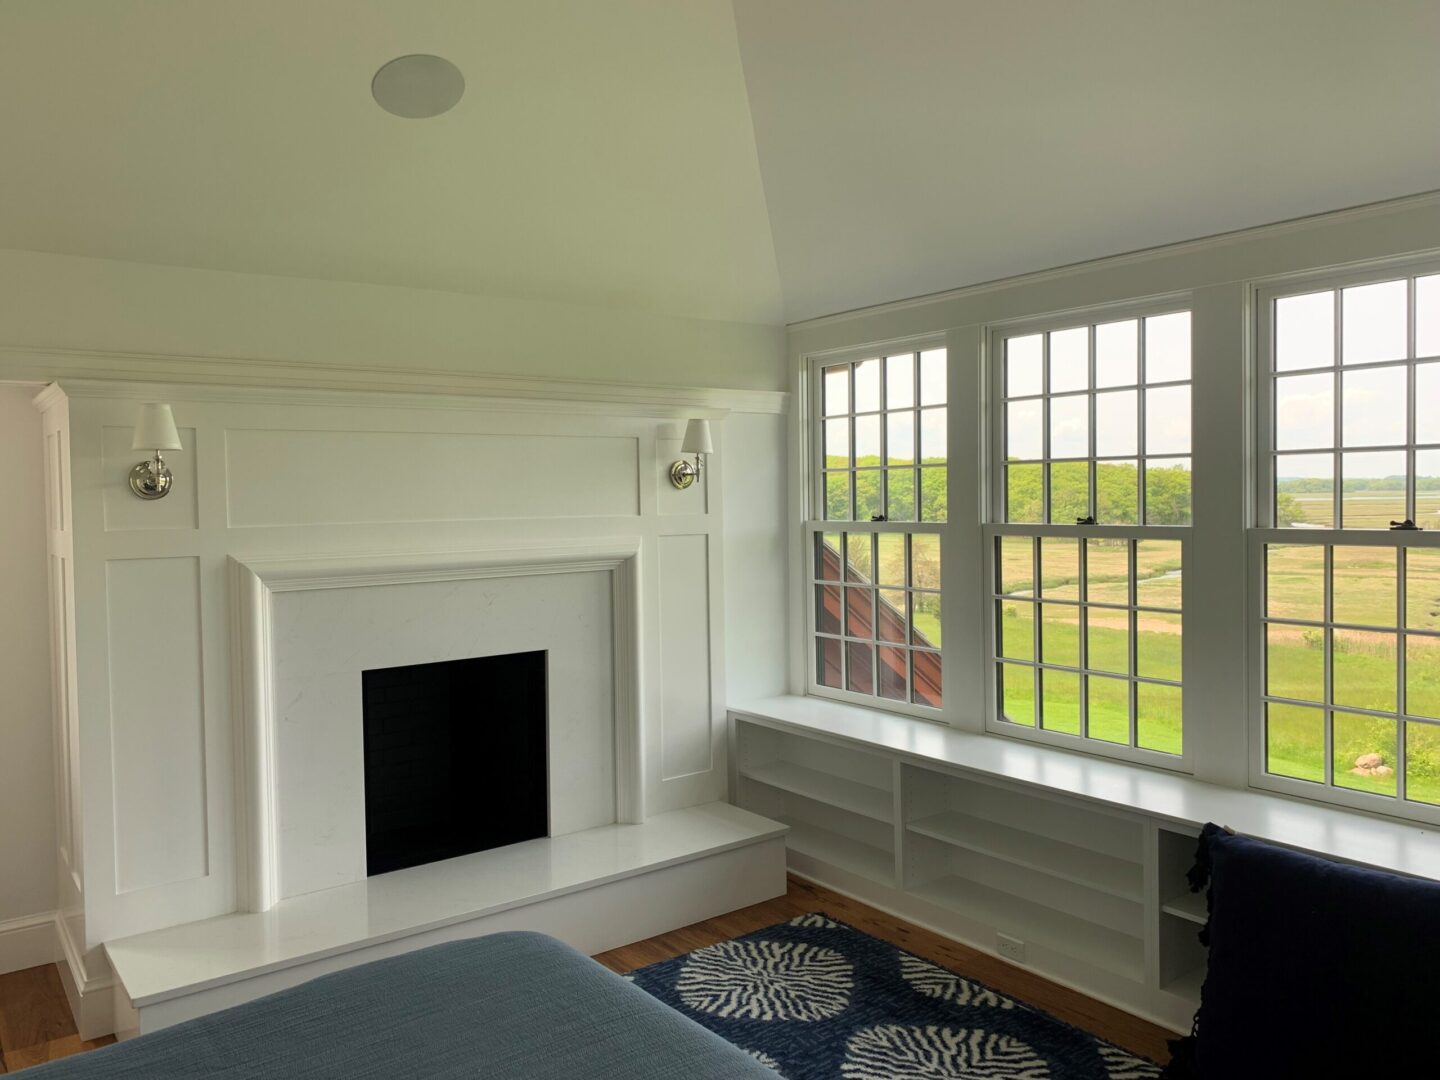 A bedroom with a fireplace and a large window.